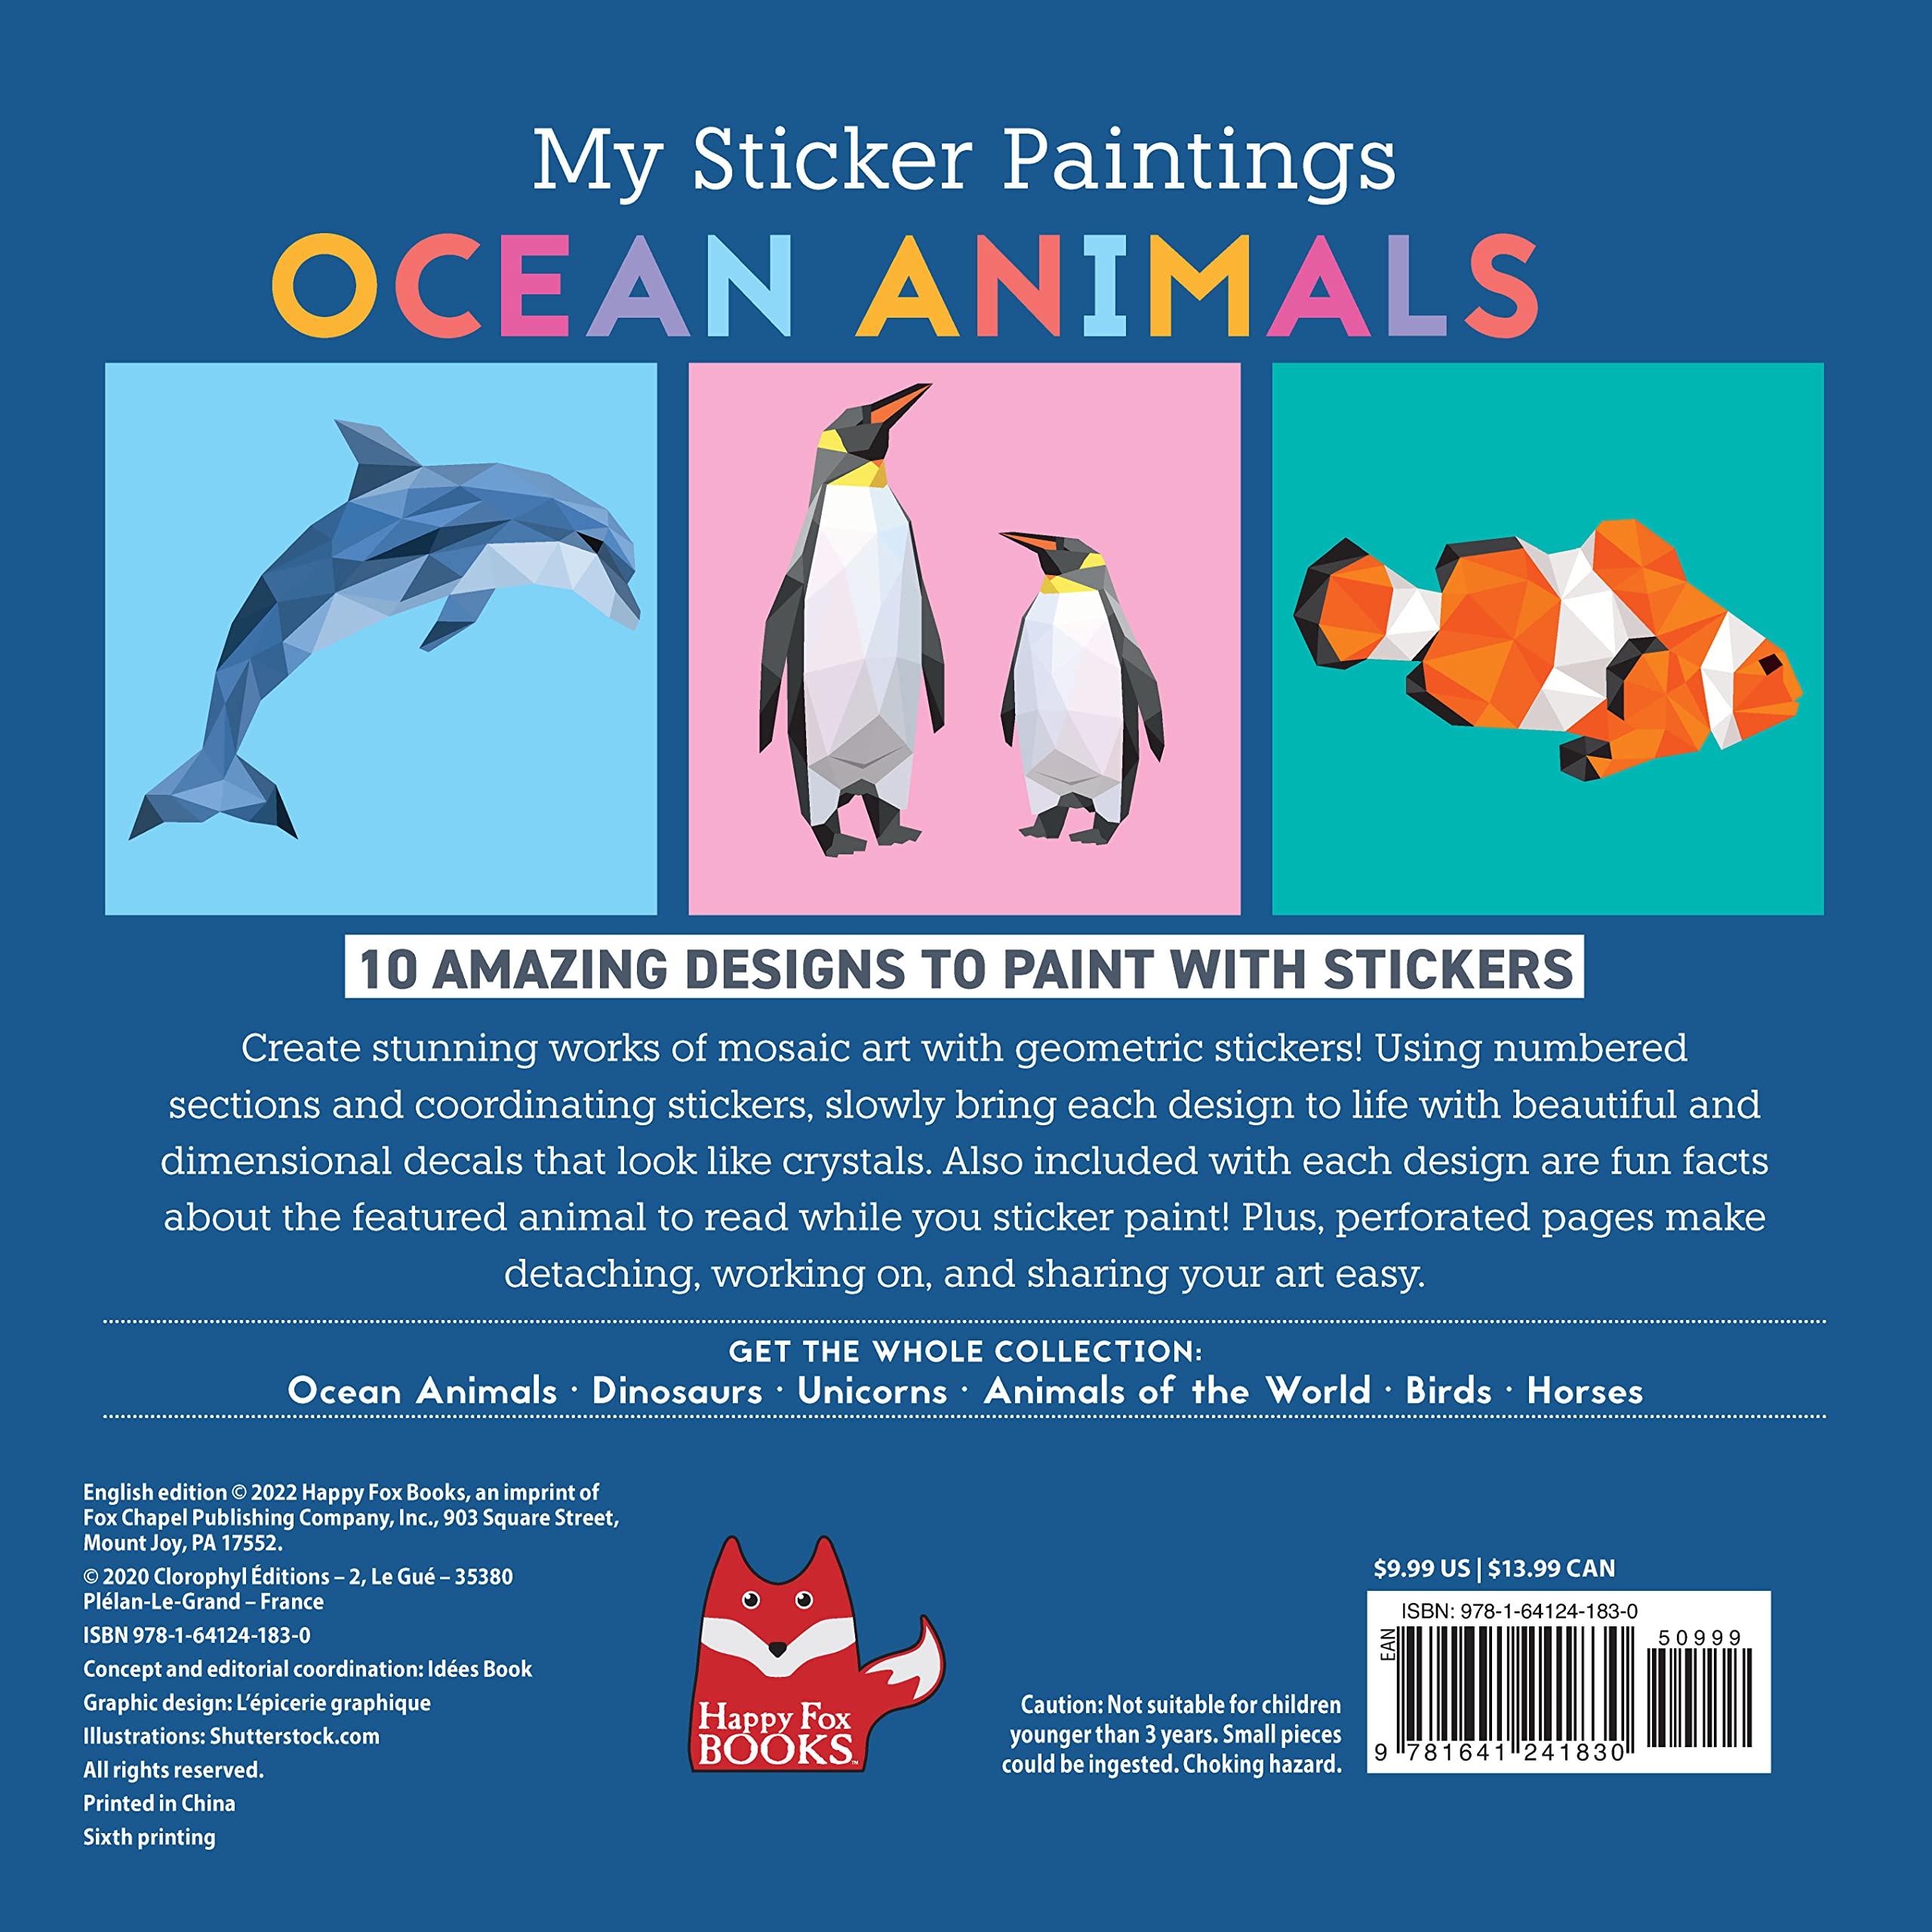 My Sticker Paintings: Ocean Animals: 10 Magnificent Paintings (Happy Fox Books) For Kids 6-10 - Jellyfish, Dolphins, Penguins, Sharks, and More, with 30 to 140 Removable, Reusable Stickers per Design